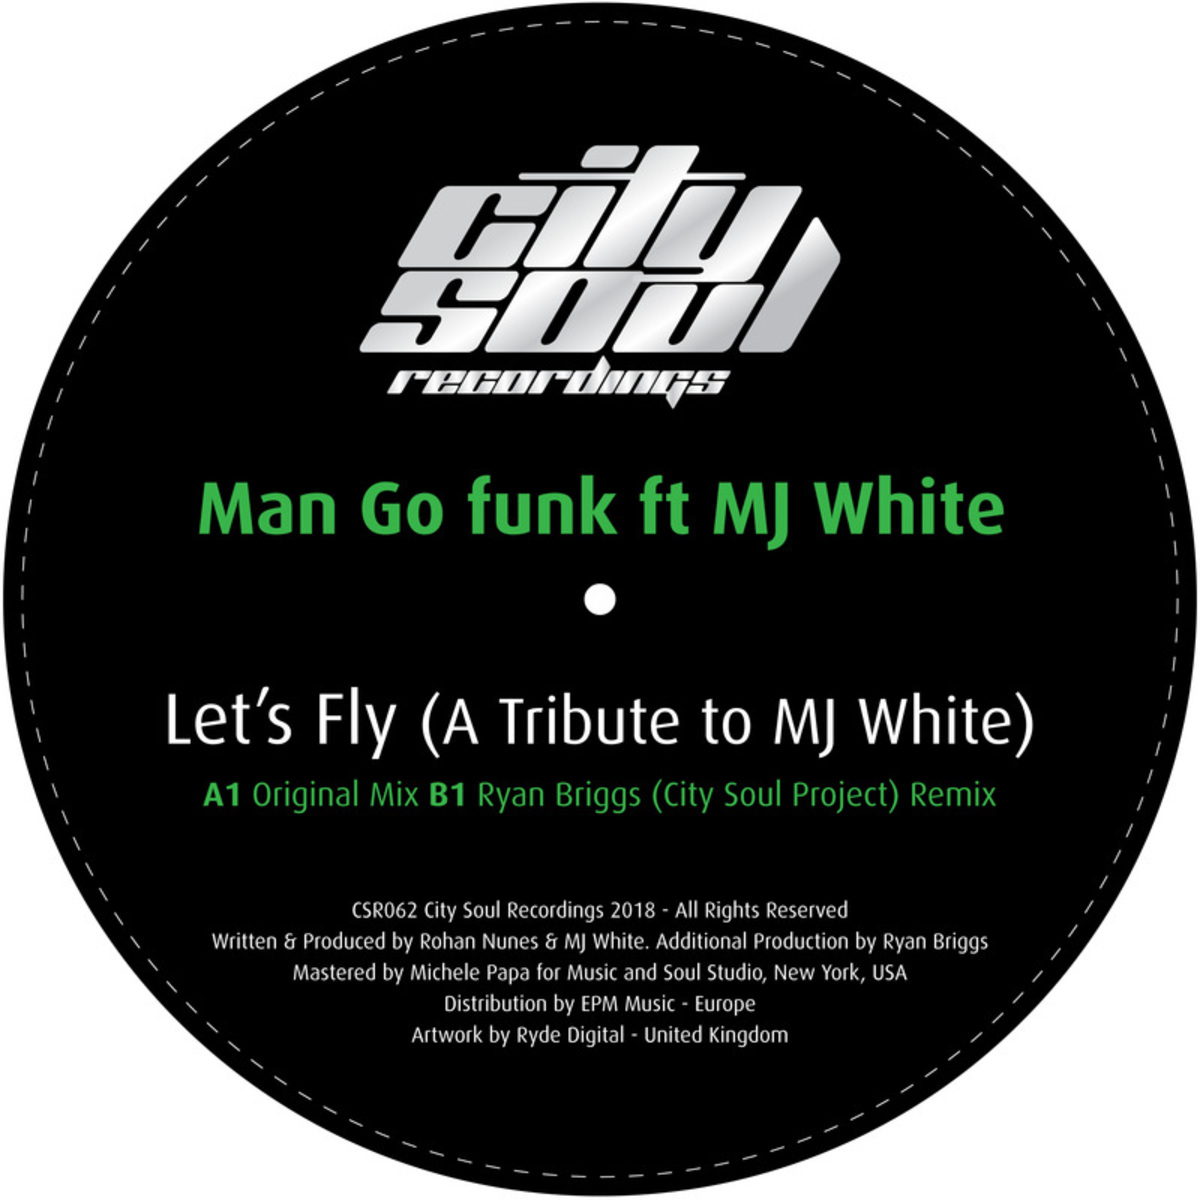 Man Go Funk - Lets Fly (A Tribute to MJ White) / City Soul Recordings